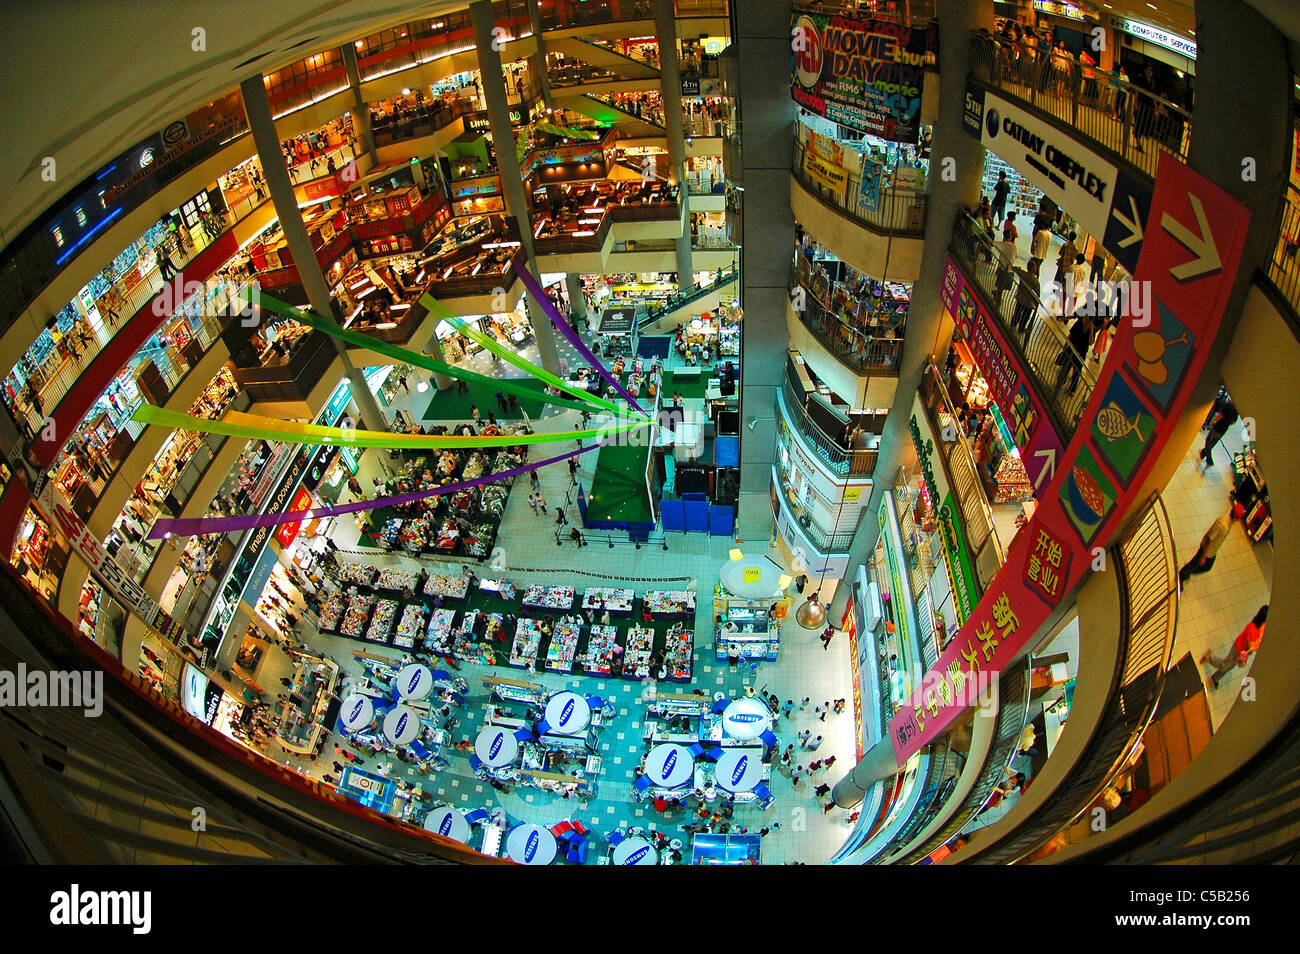 Komtar shopping mall, Penang's tallest building and shopping mall interior, George town, Penang, Malaysia. Stock Photo